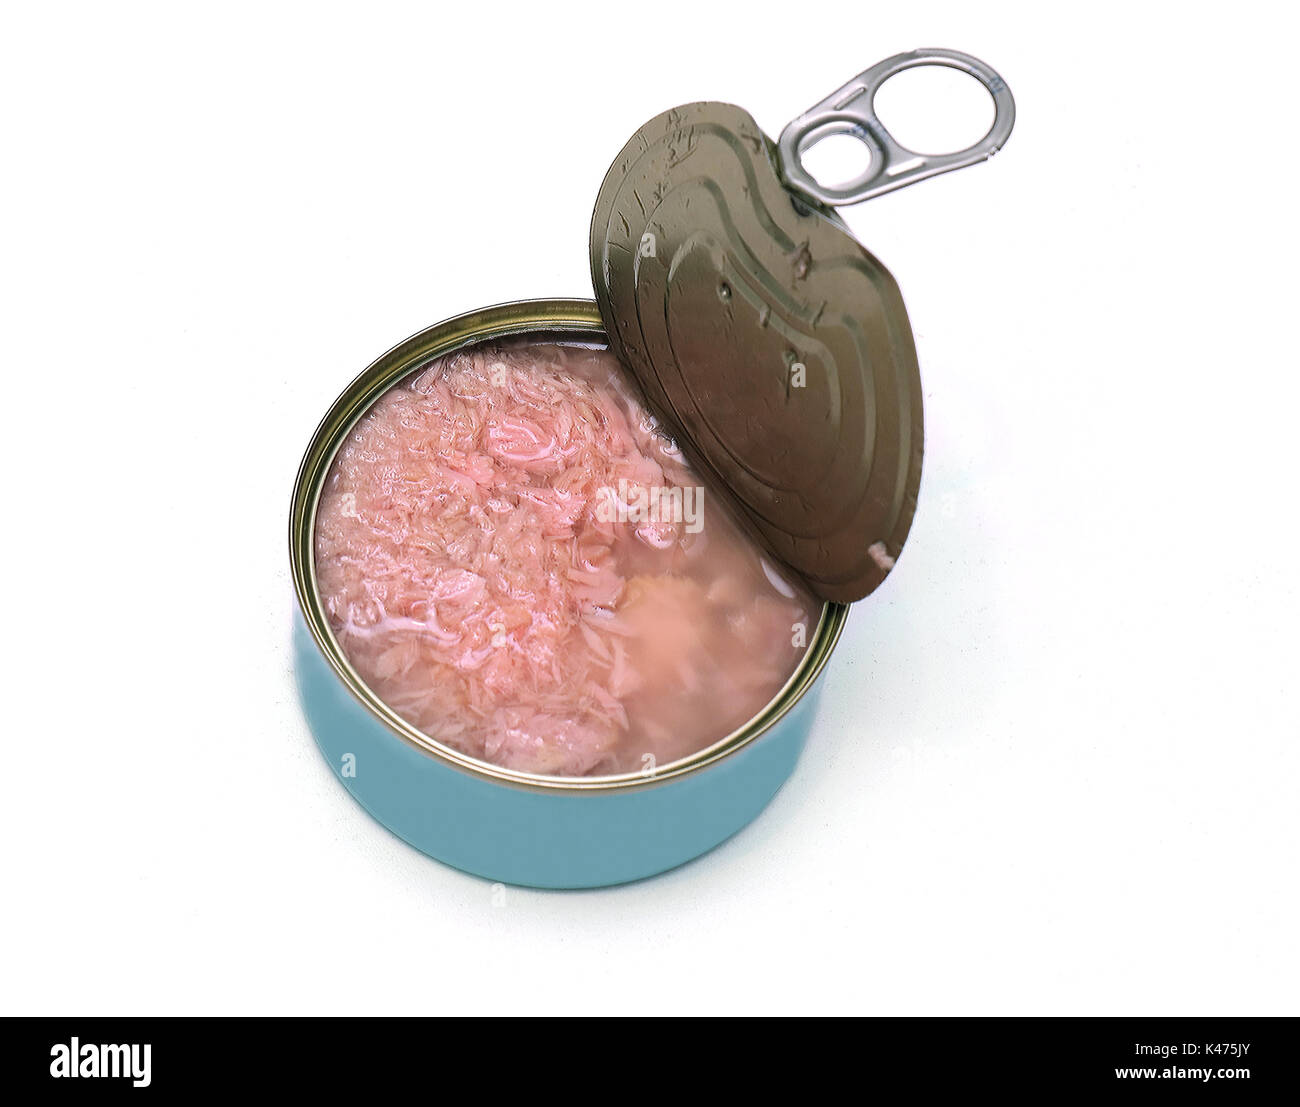 Tuna can with open lid on white background Stock Photo